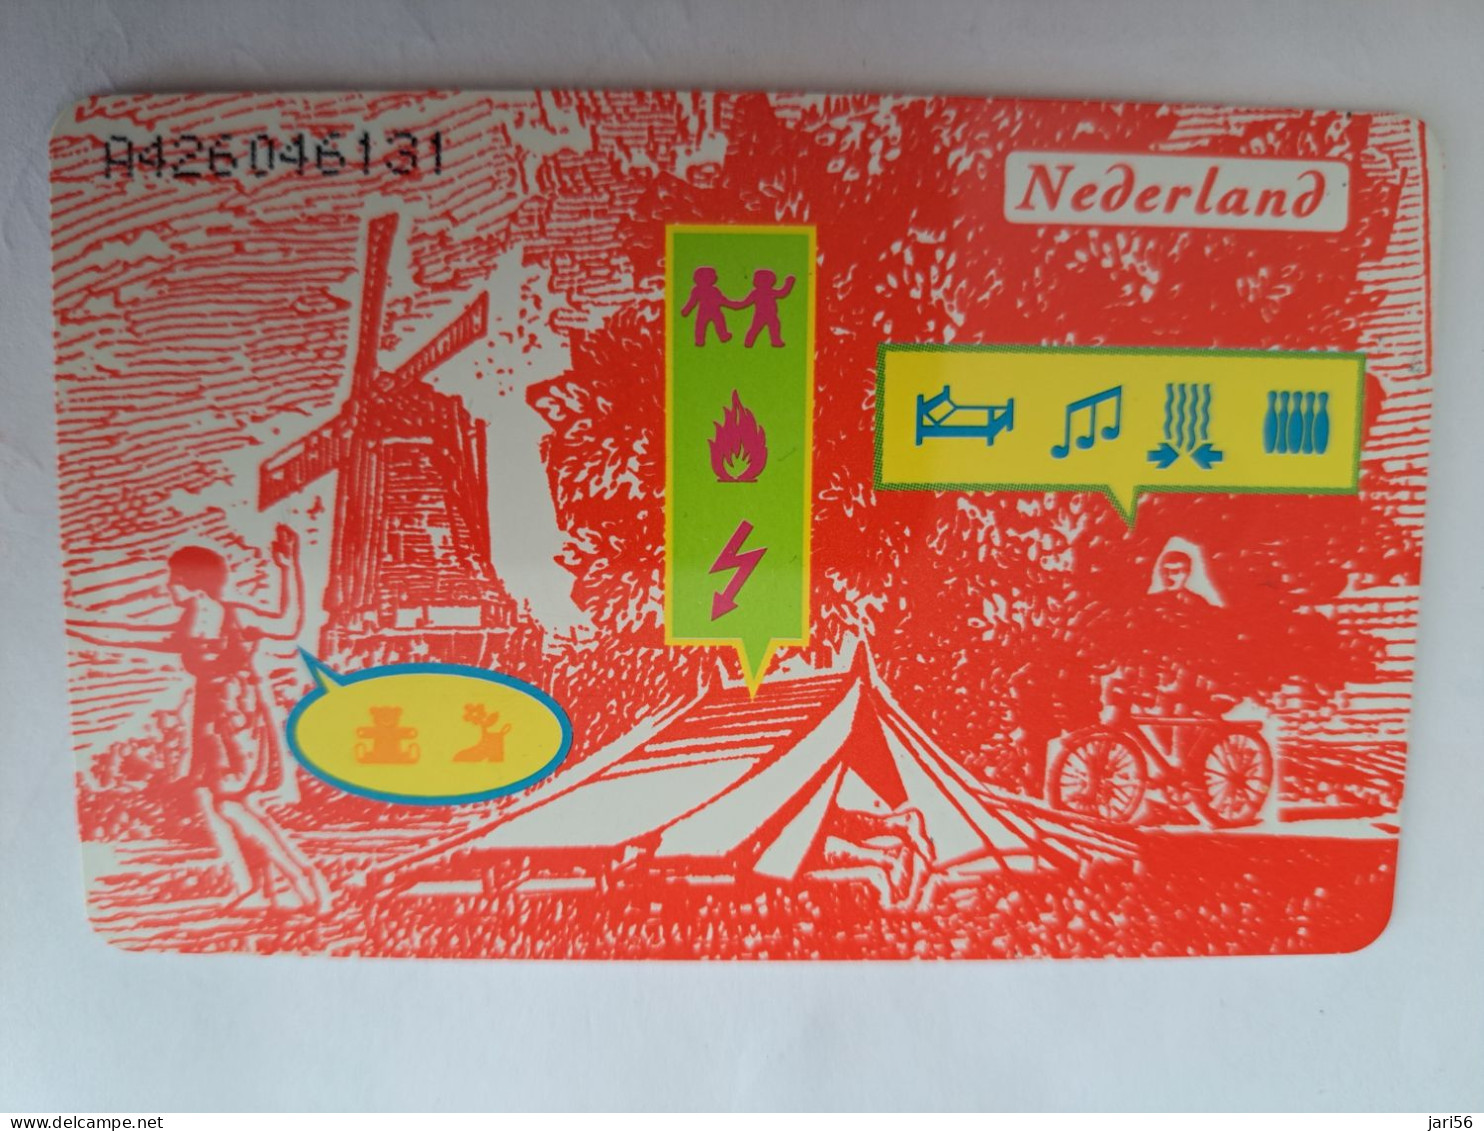 NETHERLANDS CHIPCARD / HFL 10 ,- HOLIDAY/ CONDOM/ SAFE SEX/     - USED CARD  ** 14008** - Public